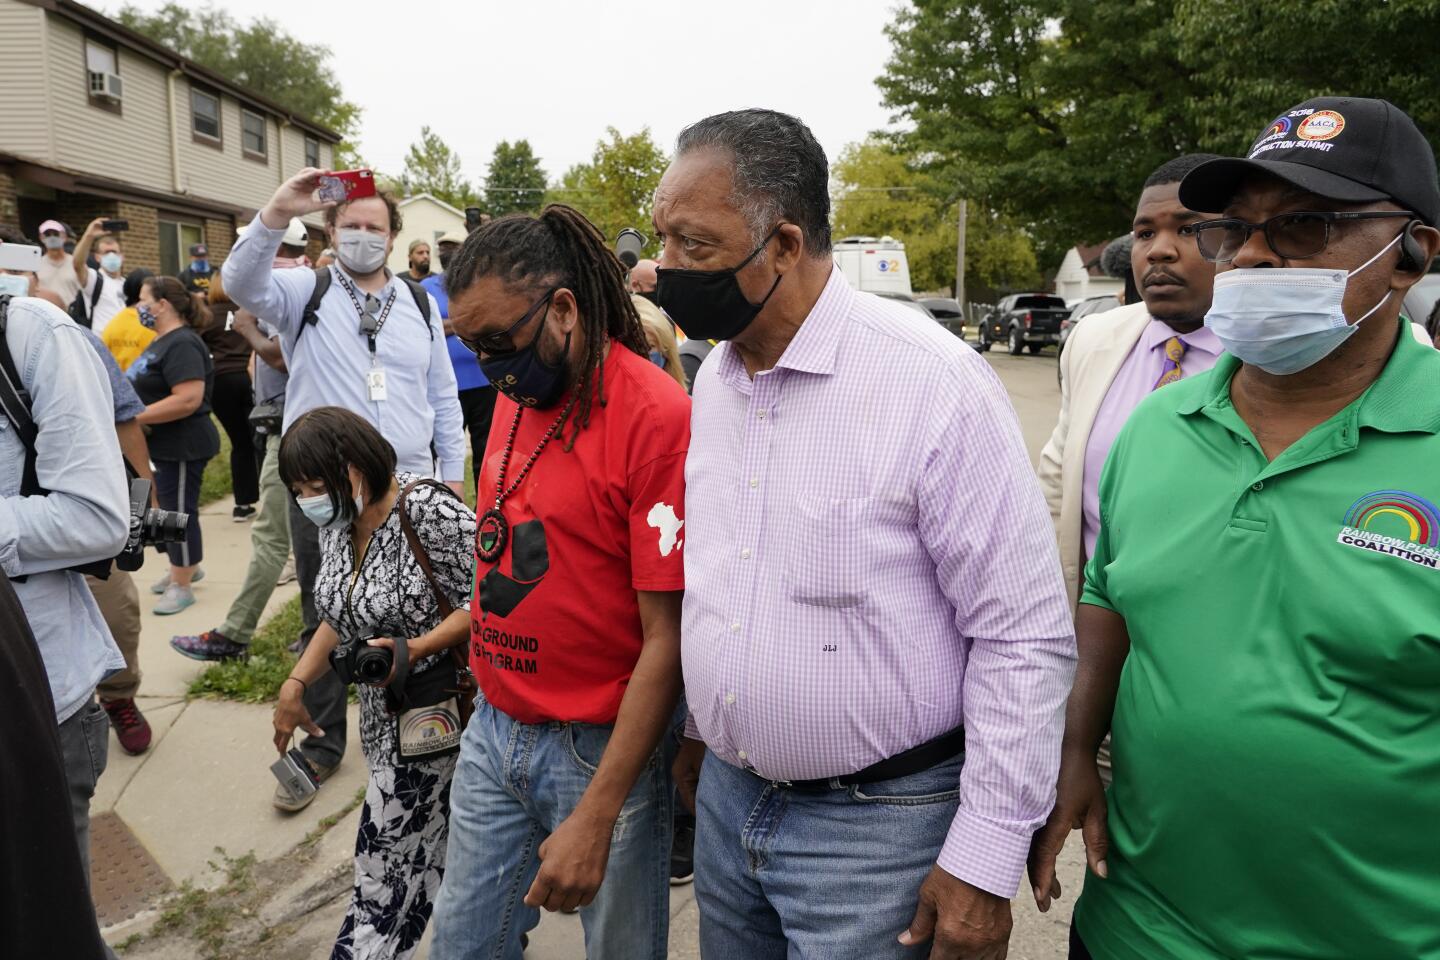 The Rev. Jesse Jackson participates in a community gathering at the site of Jacob Blake's shooting in Kenosha, Wis.